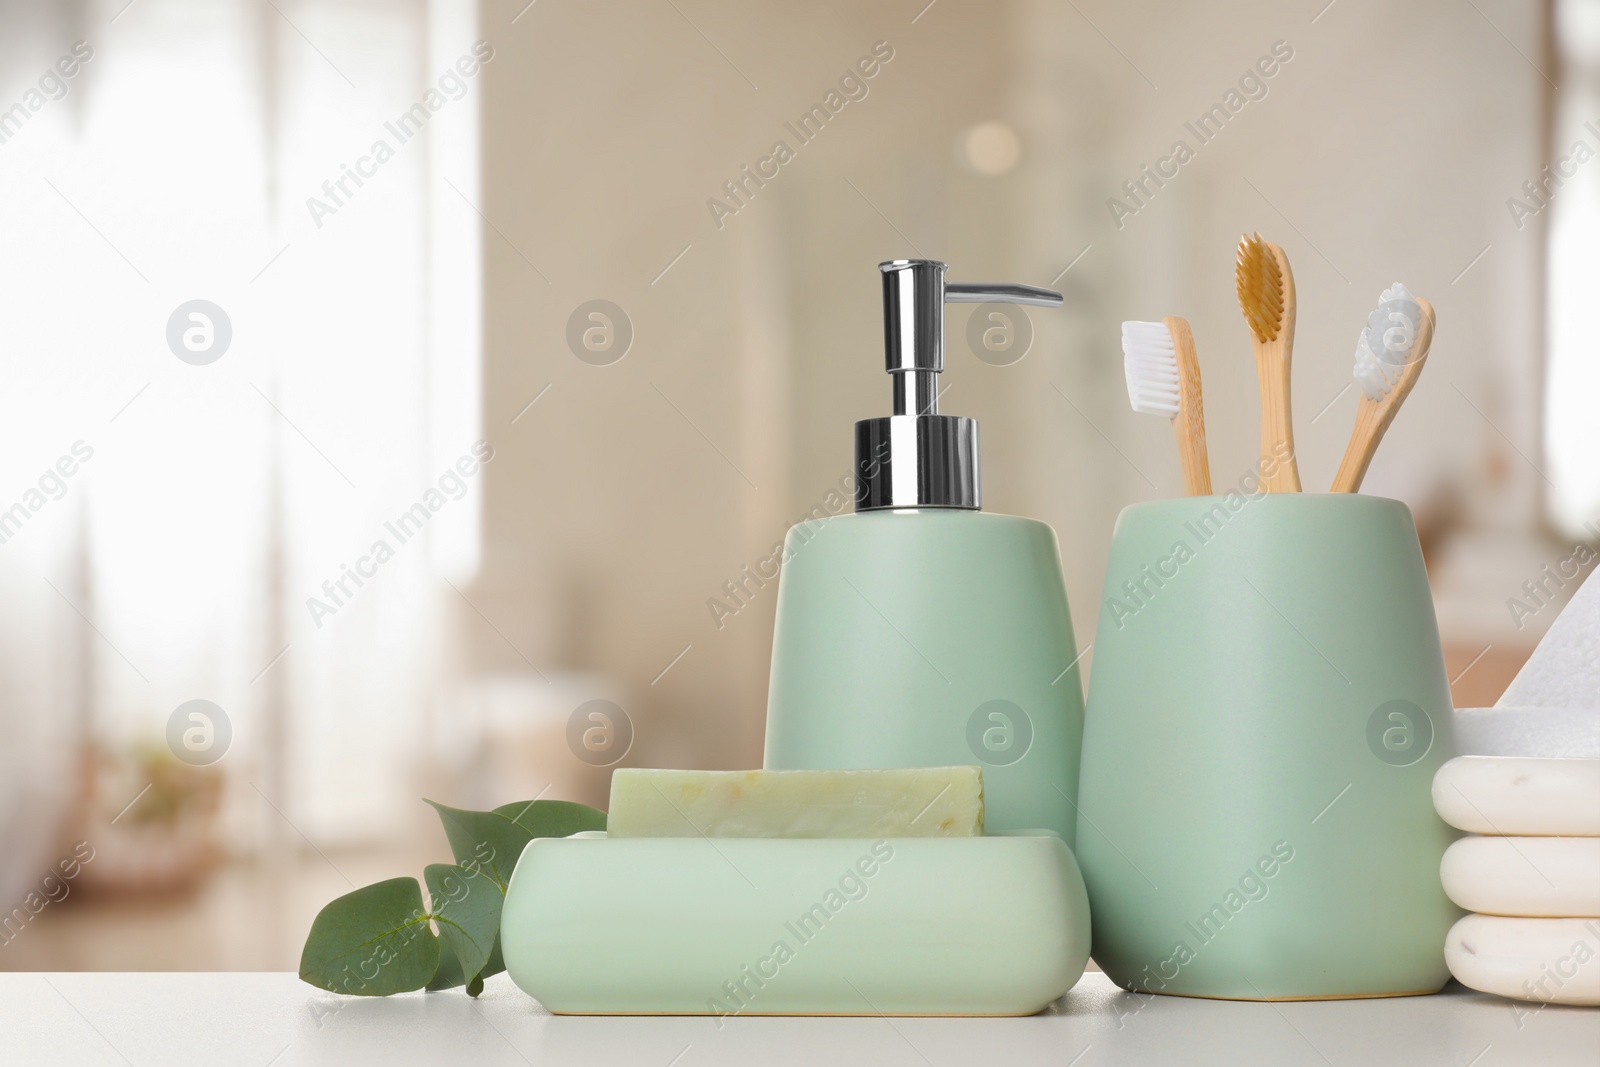 Image of Bath accessories. Different personal care products and eucalyptus leaves on white table in bathroom